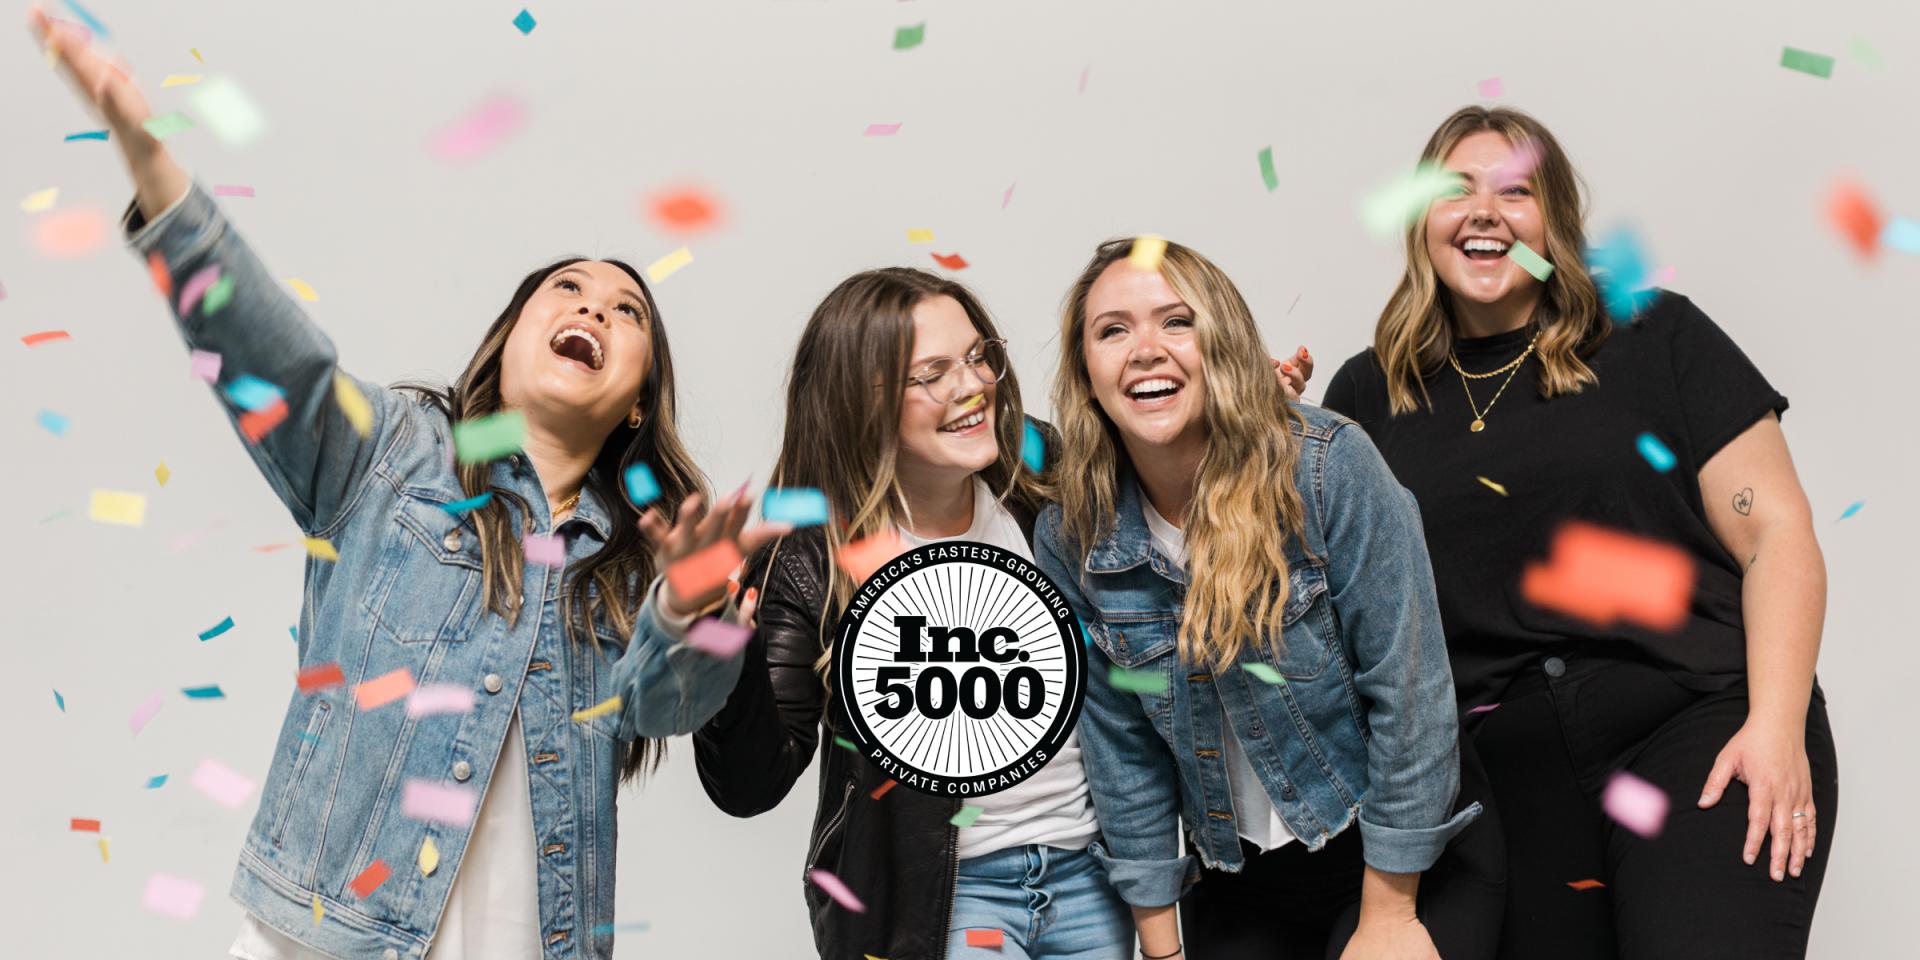 Smart City team playing in confetti with inc 5000 badge